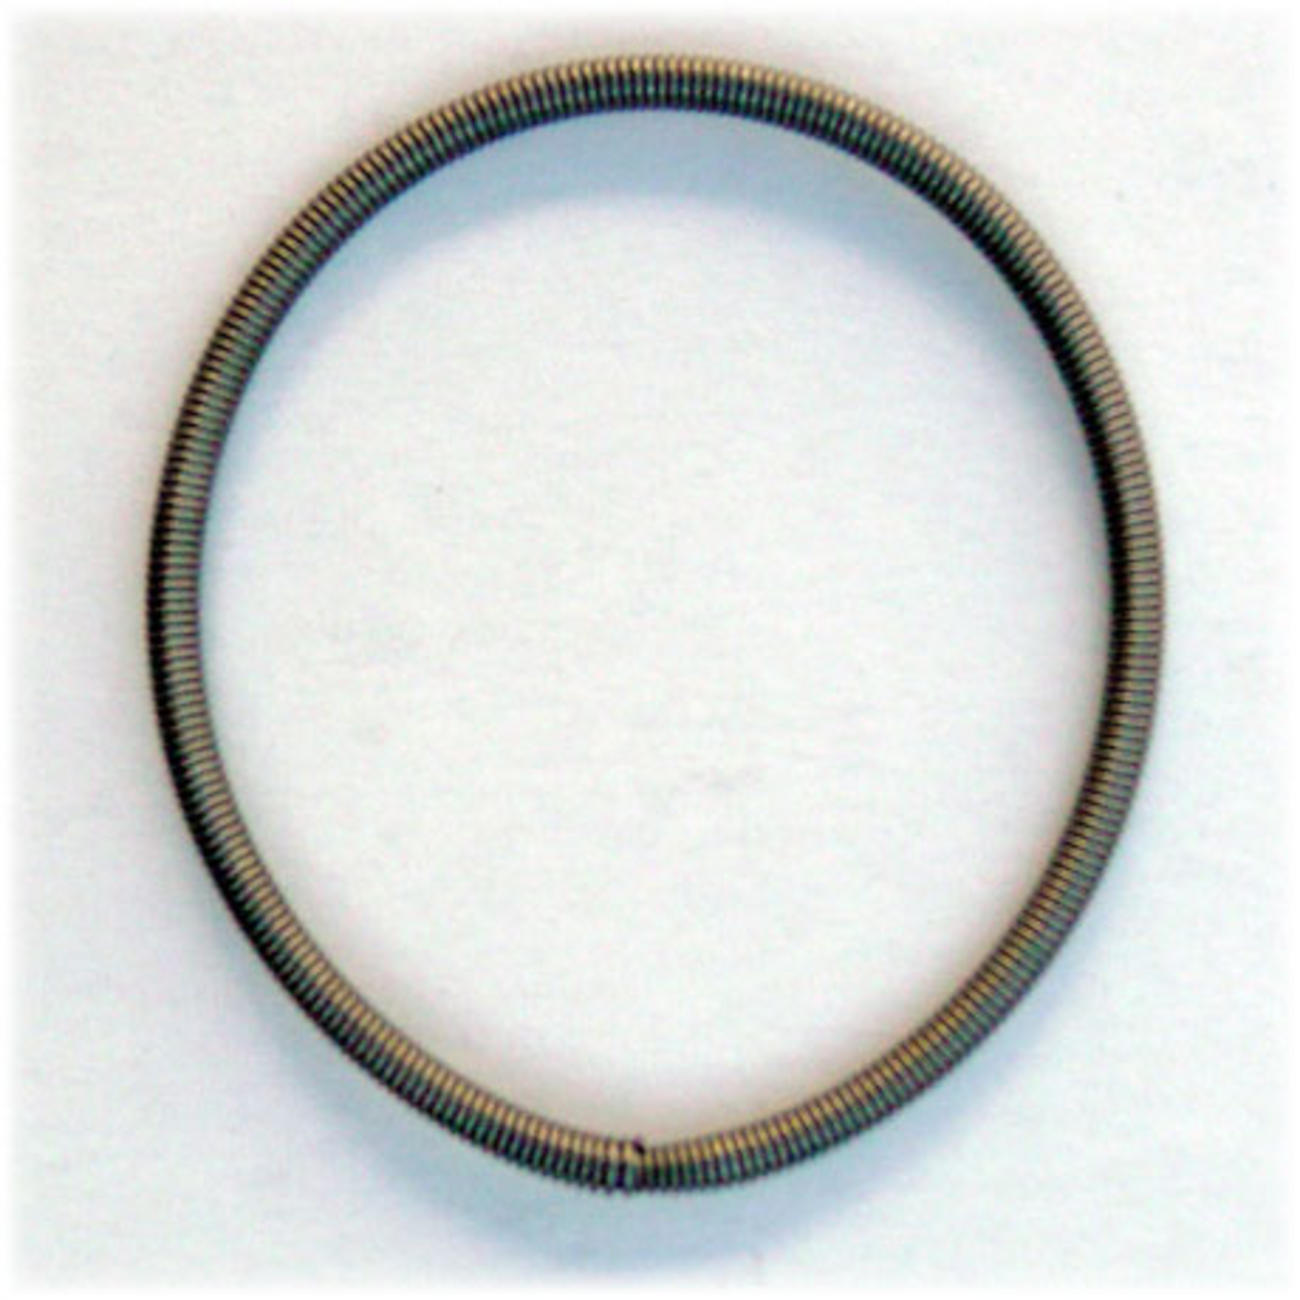 Adjustable ring(stainless steel)for mast extension